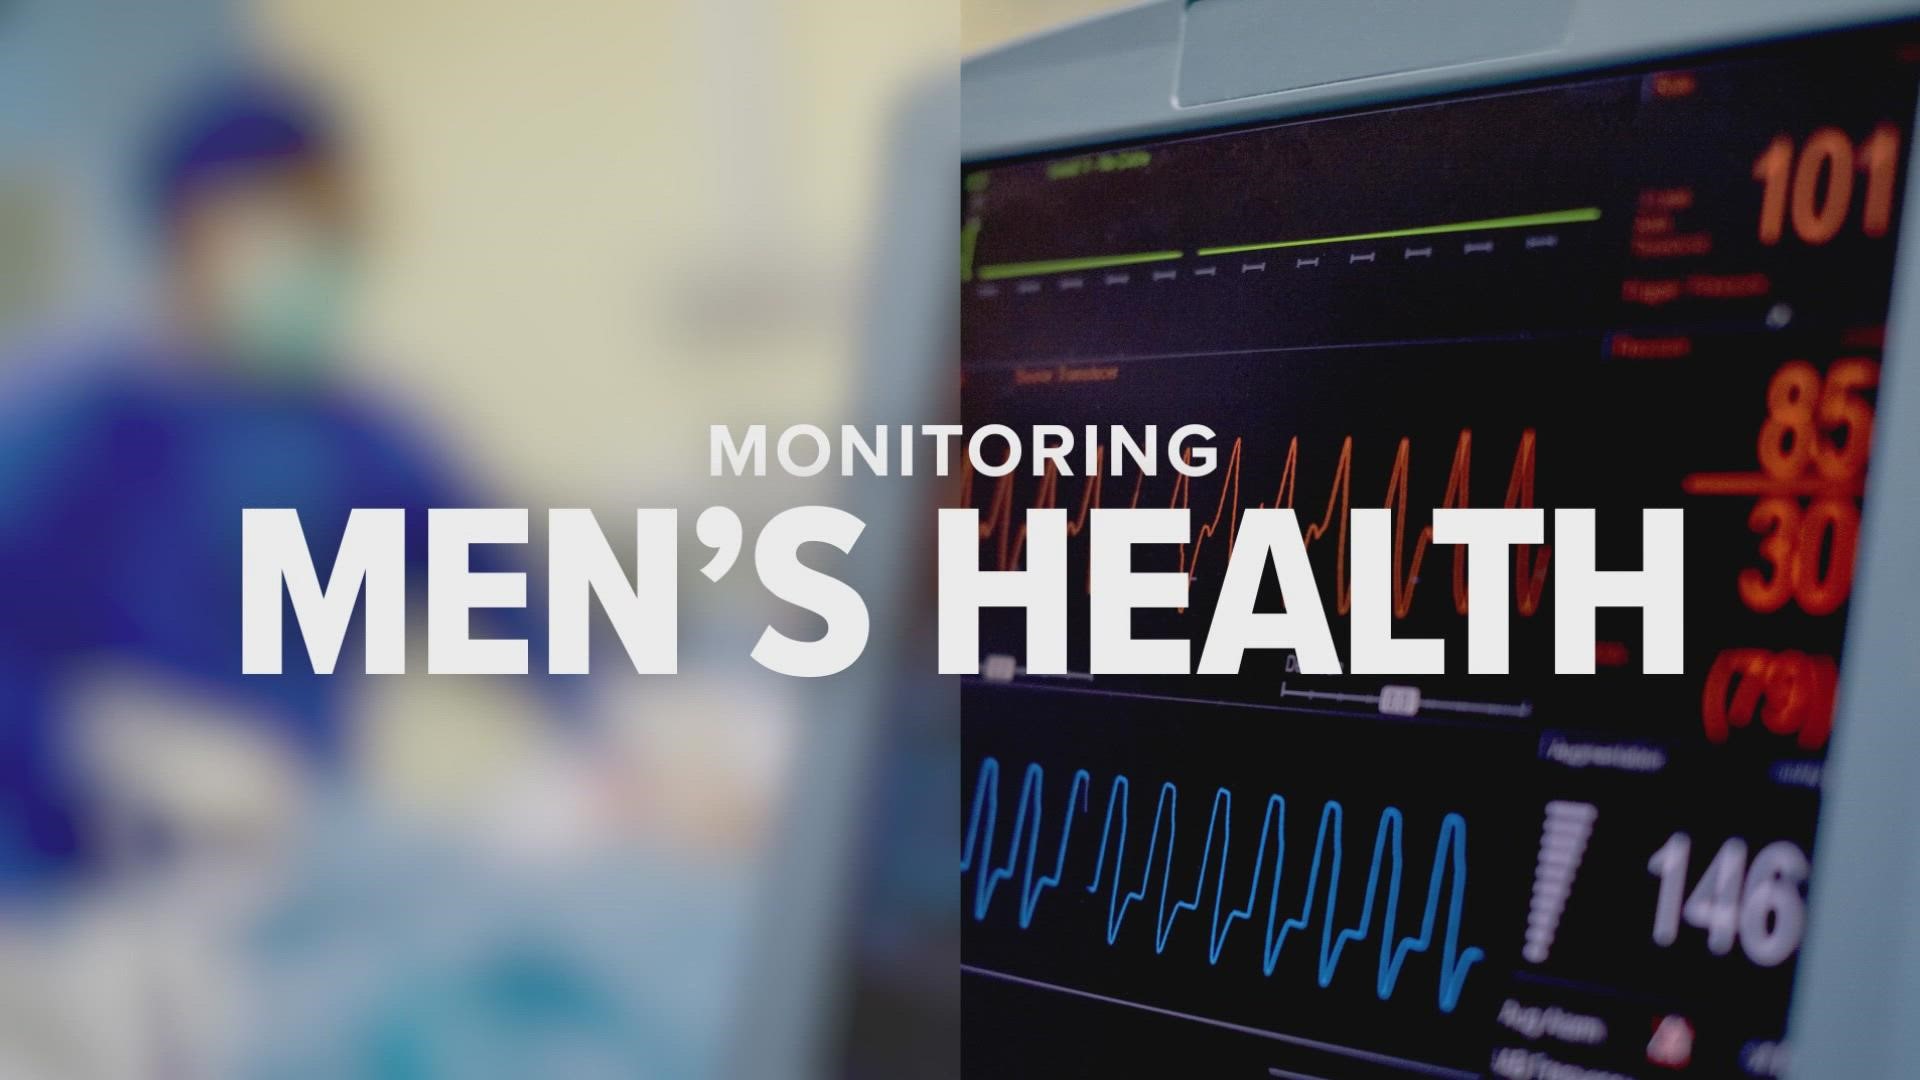 We’re starting a new segment focused on monitoring men’s health. We’ll talk about issues men should be talking about, like blood pressure.